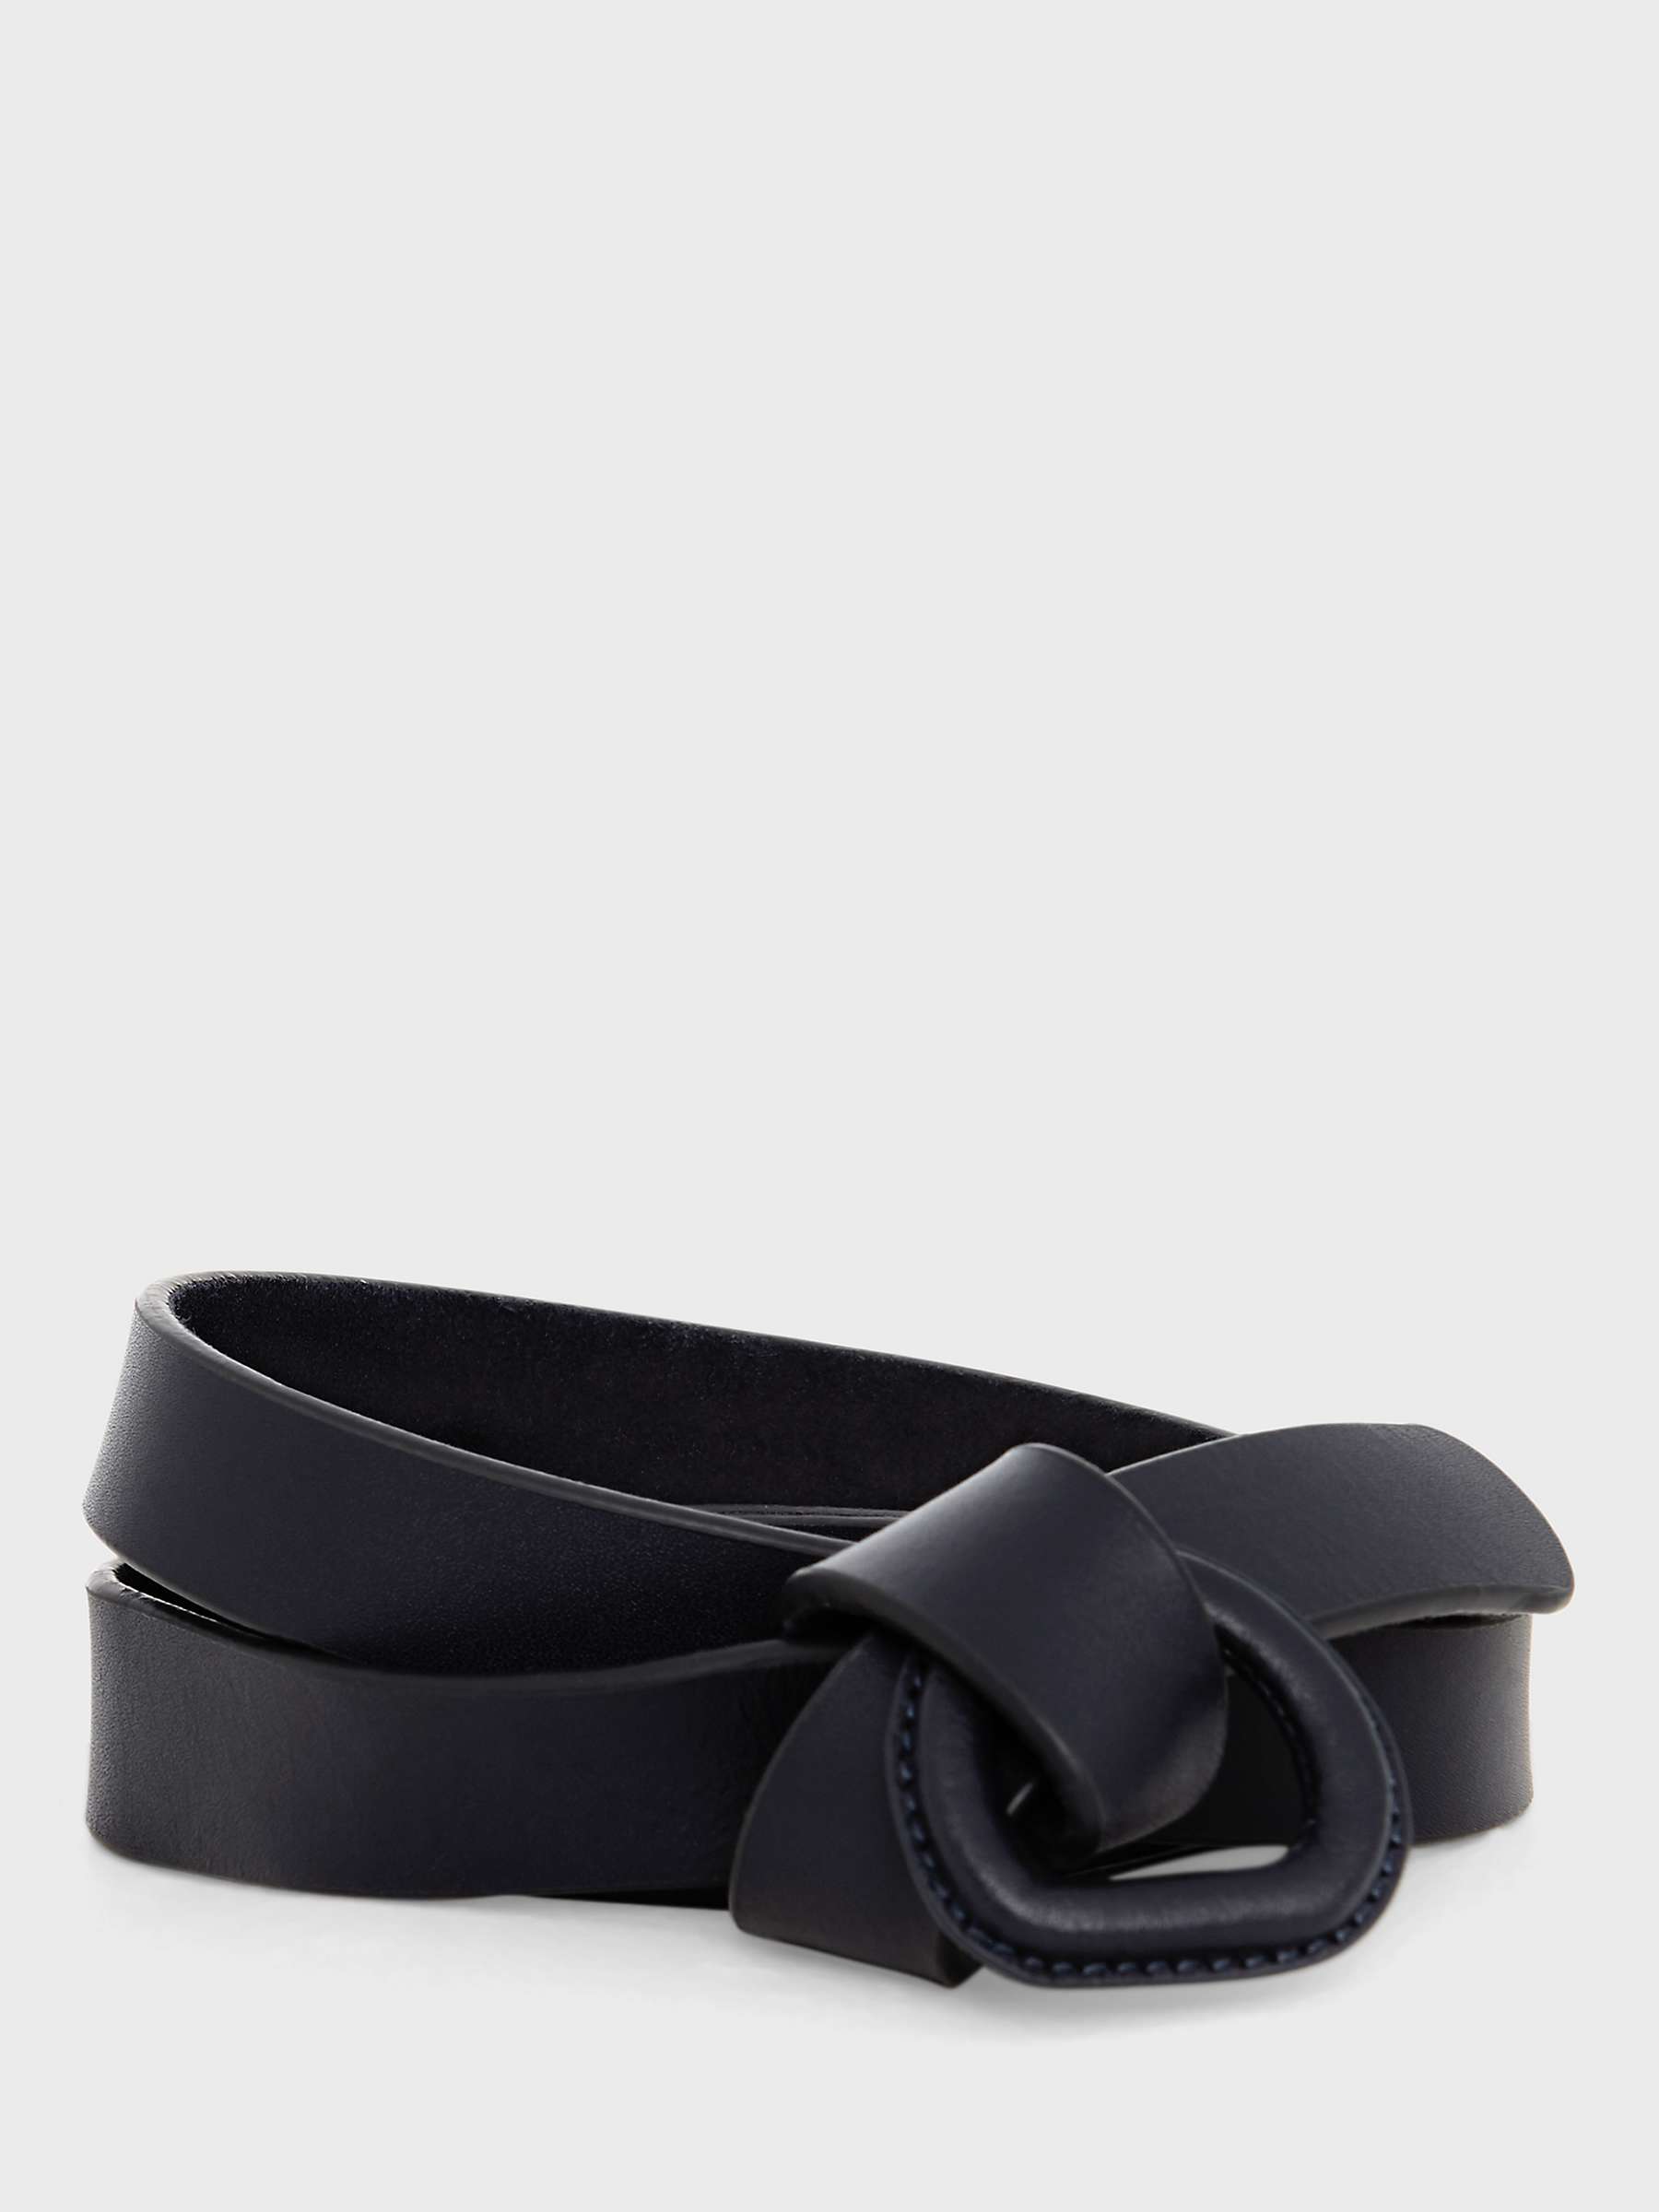 Buy Hobbs Lexi Leather Knotted Belt, Navy Online at johnlewis.com